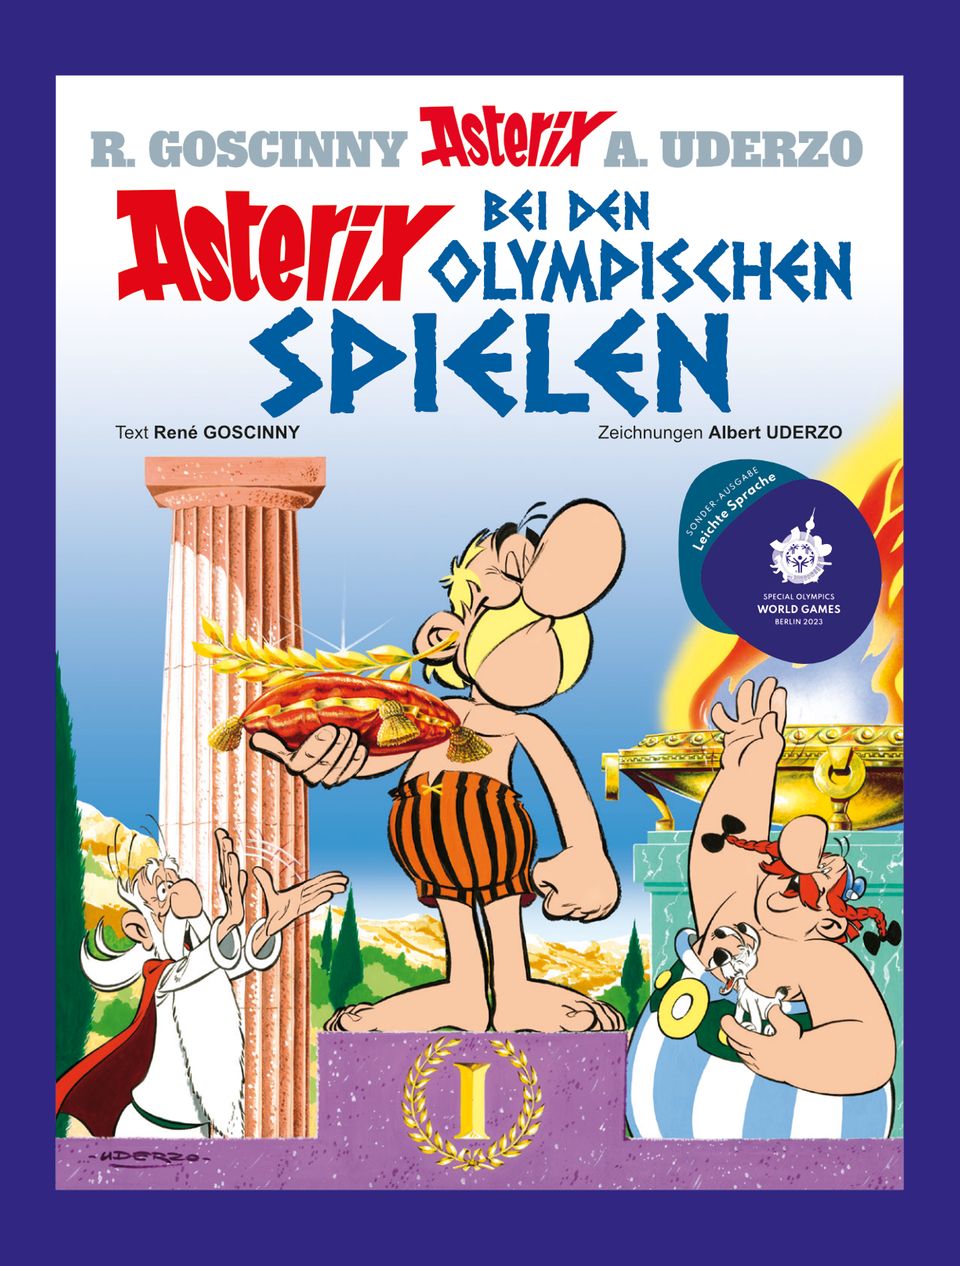 The special edition of "Asterix at the Olympic Games"